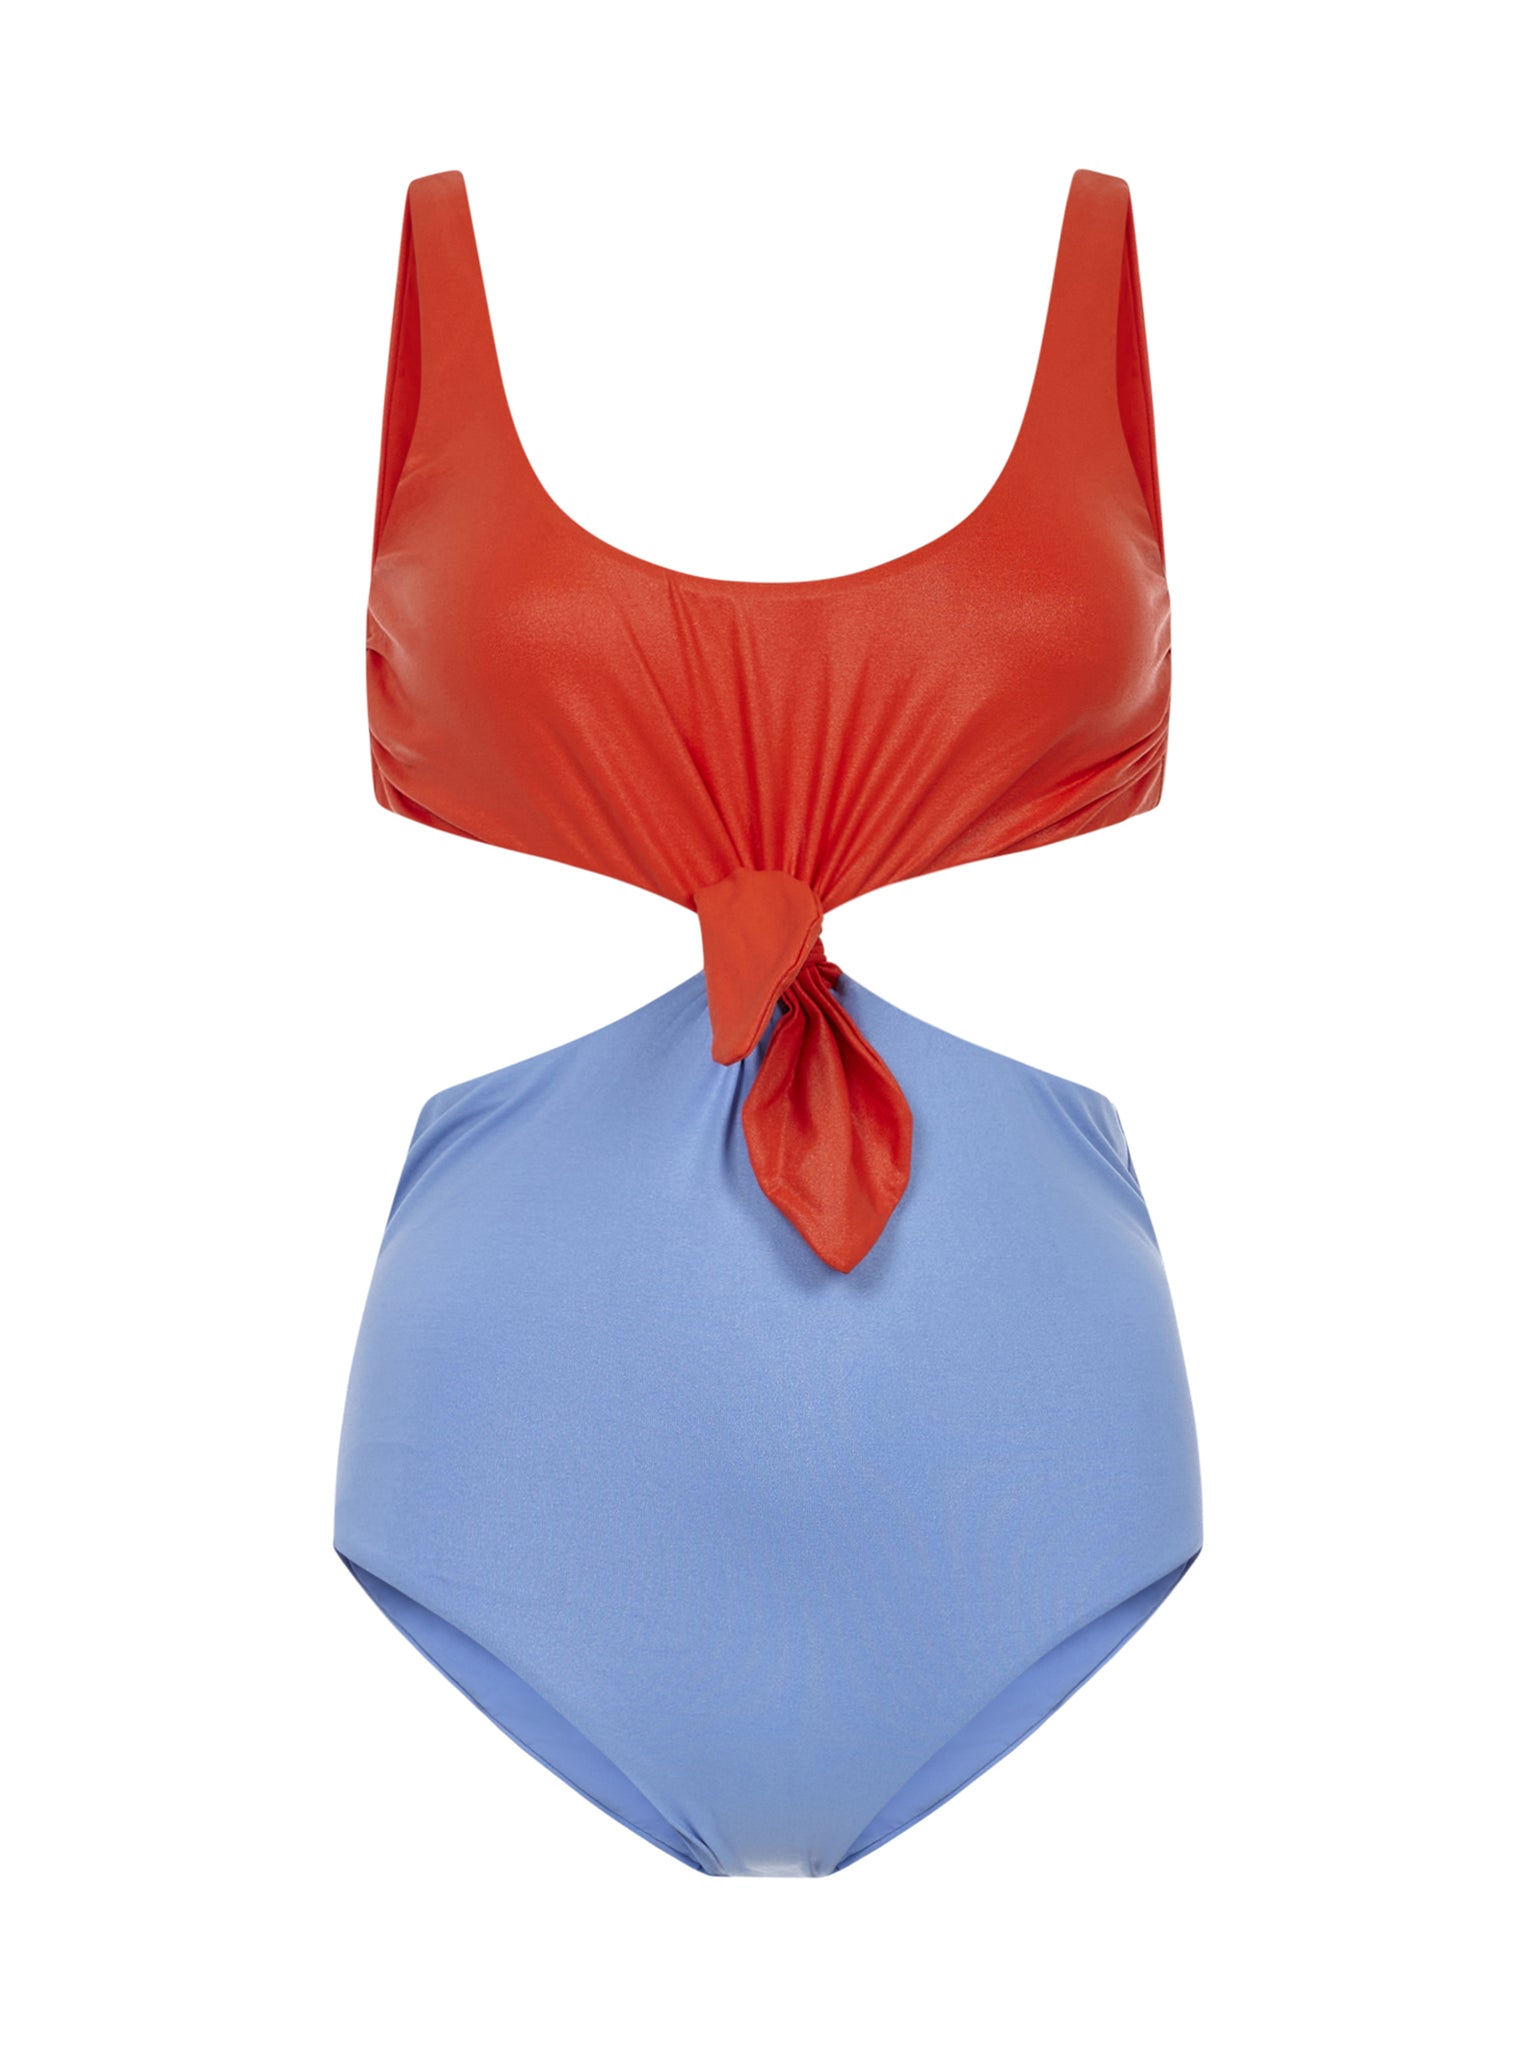 Knotting Bay Bicolor Maillot Coral and Blu